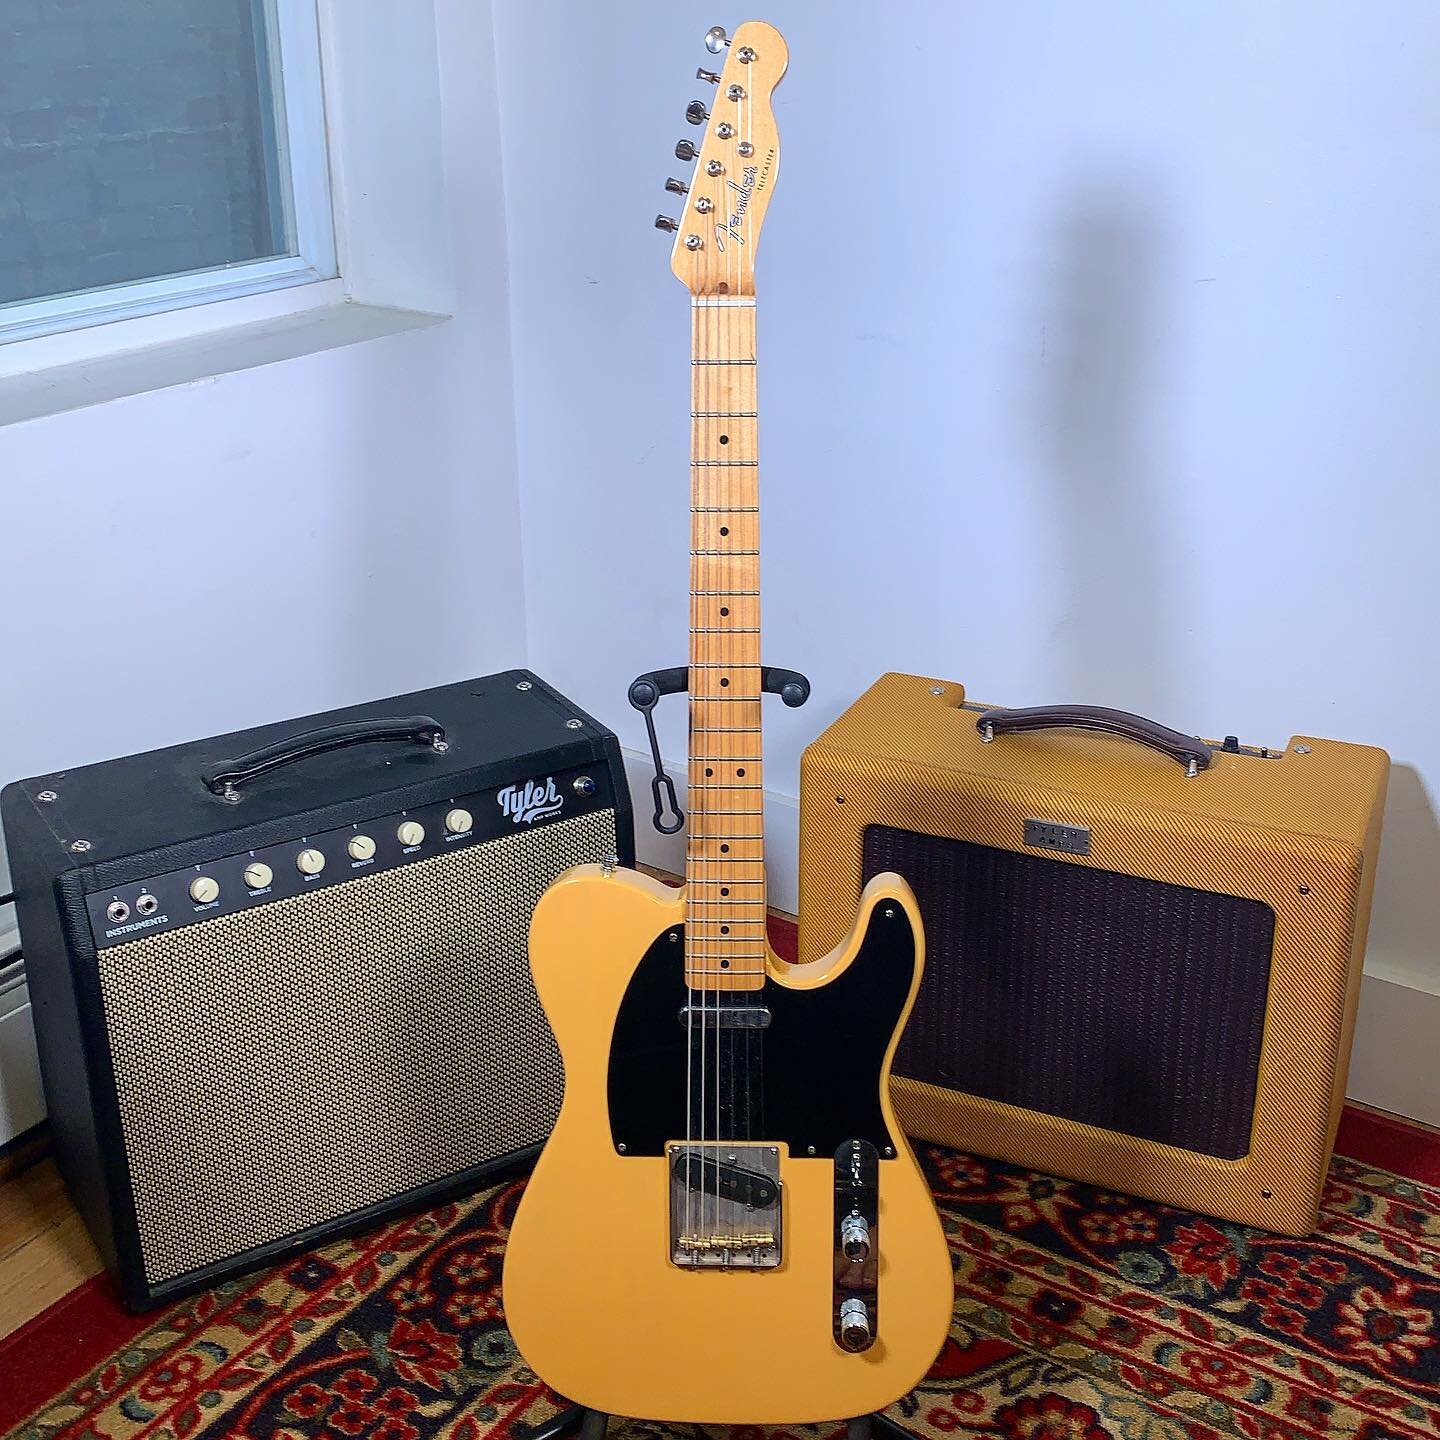 Today&rsquo;s gear offering is my Fender telecaster. I was never a telecaster guy, but last year I played a great one that belongs to @michaelperezcisneros and just knew I had to get my hands on one! This one was a very happy find, it&rsquo;s a Baja 